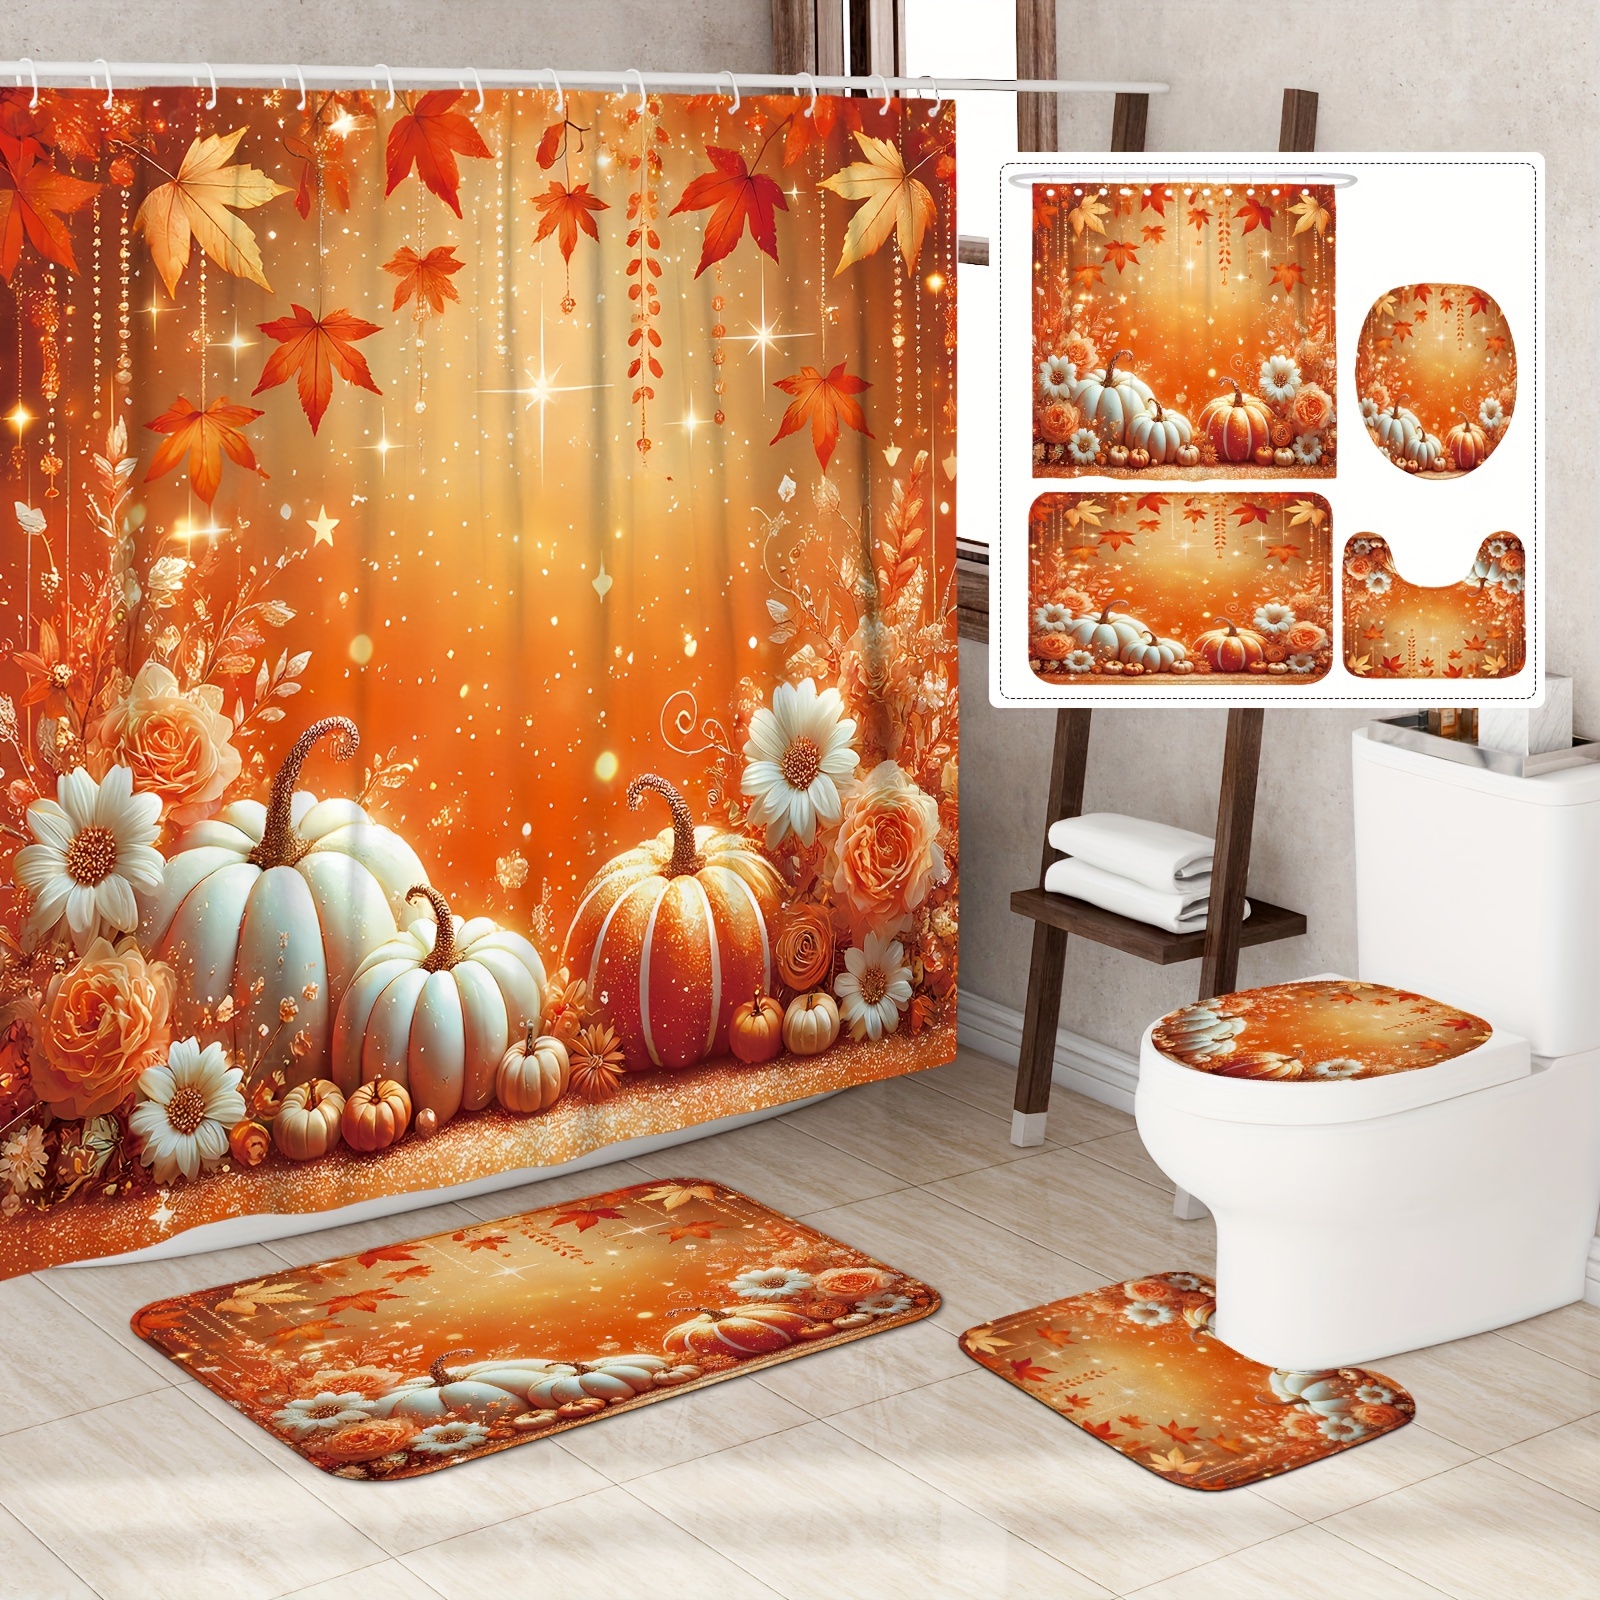 

Autumn Elegance Shower Curtain Set - Waterproof Polyester With Floral & Pumpkin Design, Non-slip Bath Mat, U-shaped Toilet Lid Cover, 12 Hooks - Perfect For Fall & Thanksgiving Decor, 1pc/4pcs Option